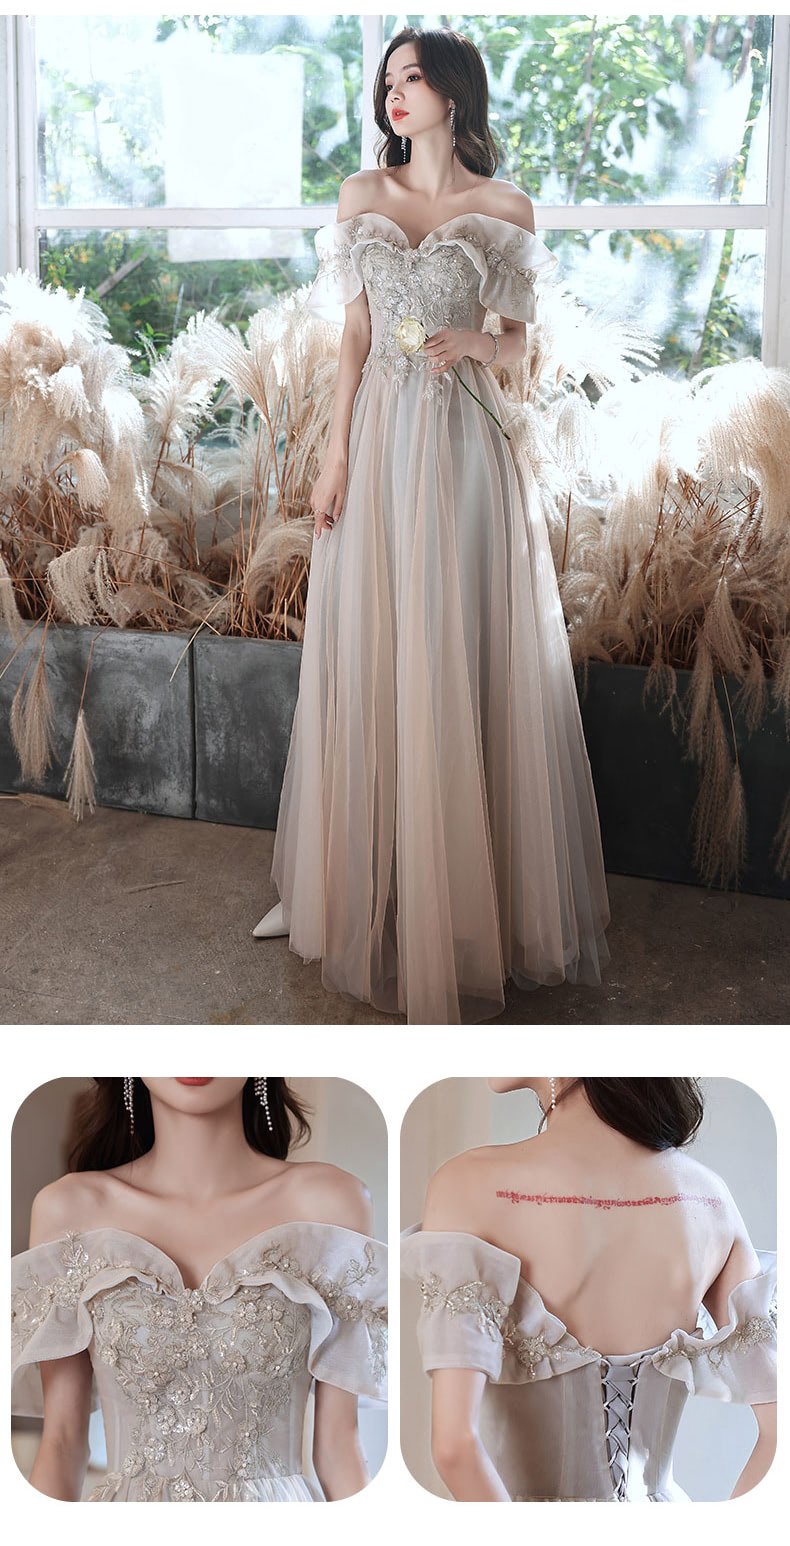 Multiway-Maxi-Bridesmaid-Dress-Wedding-Guest-Long-Formal-Outfit19.jpg